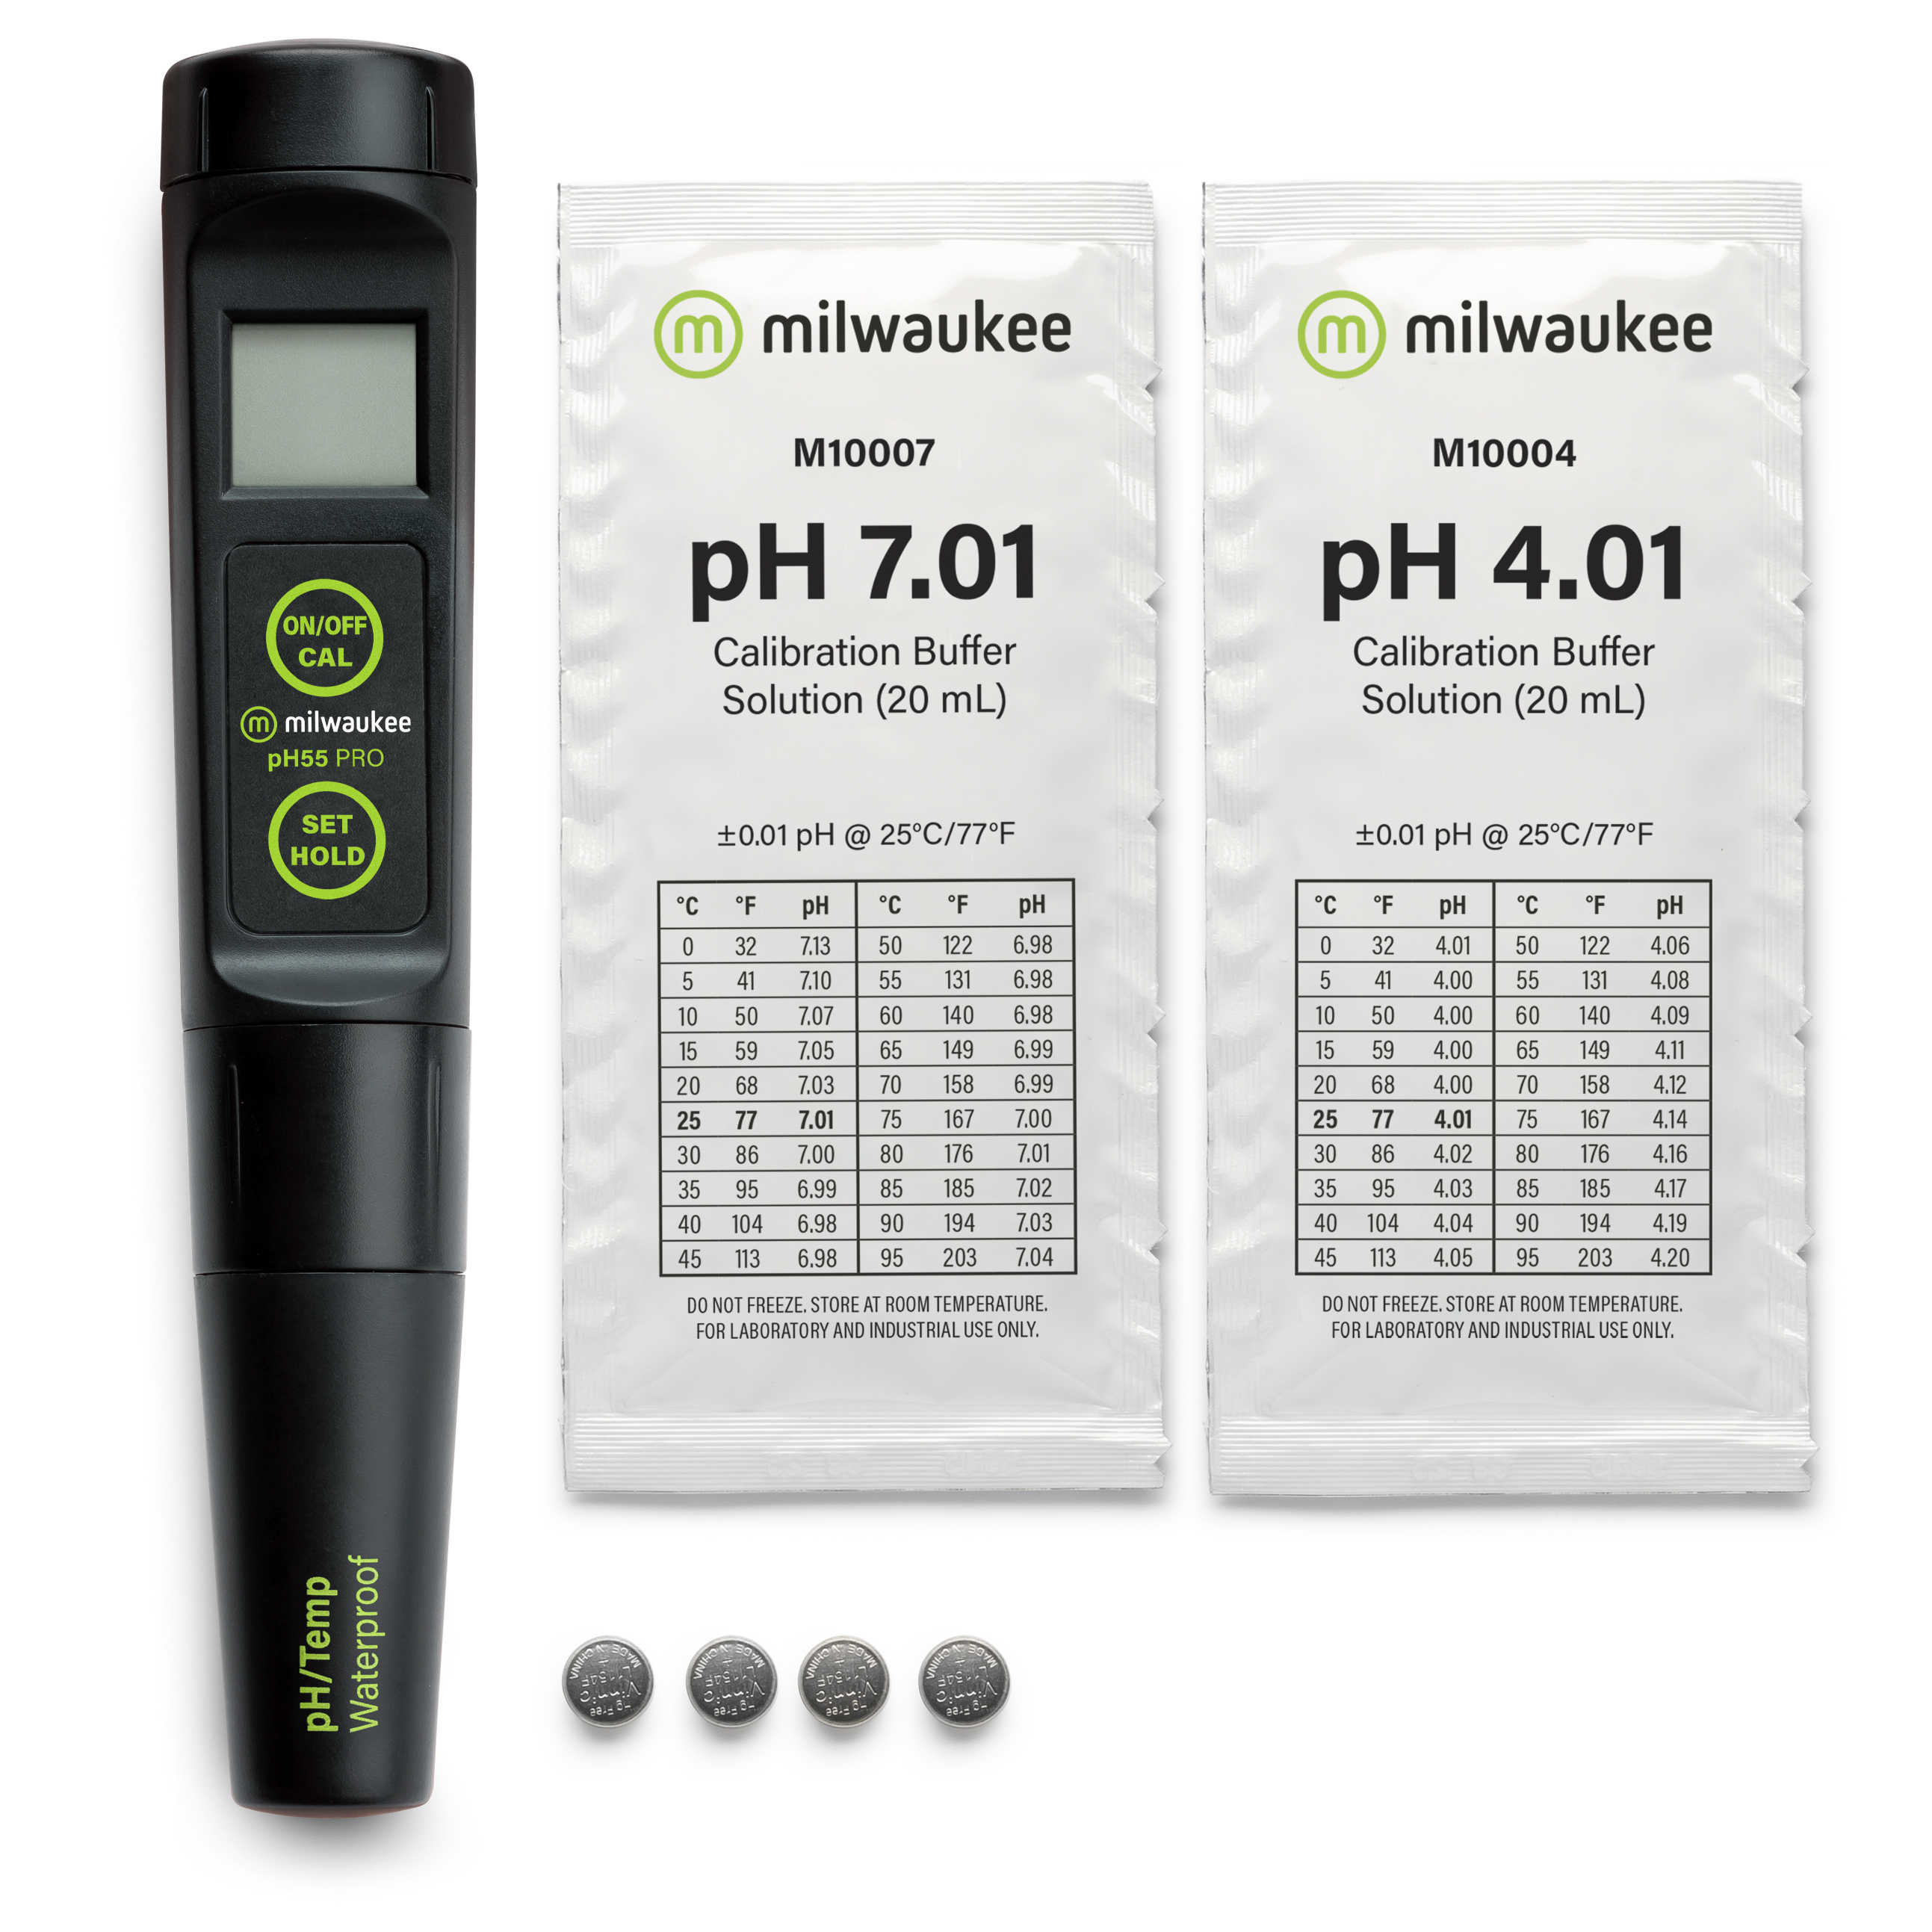 Milwaukee PH55 waterproof pH / Temperature Tester with automatic temperature compensation (ATC) and replaceable probe